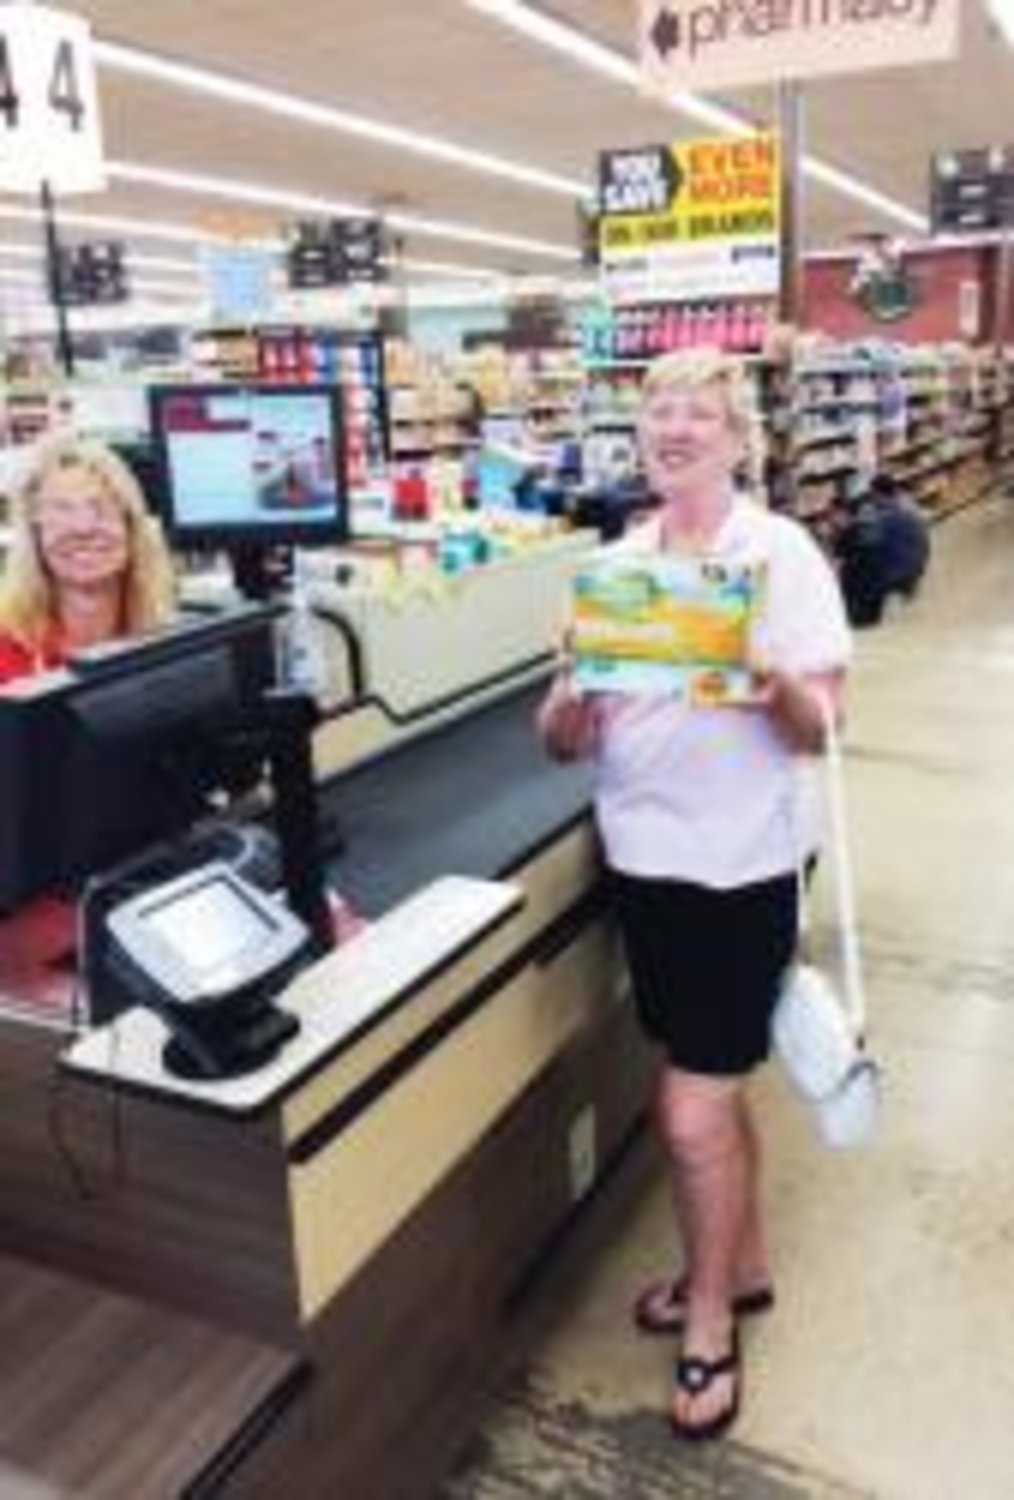 Brookshire's in Quitman began selling beer and wine on June 24. The sales came as a result of two local election options (passed May 10, 2014) to legalize the sale of beer and wine in grocery and convenience stores, as well as permit the sale of mixed beverages in restaurants within the city limits. Judith Sanders, pictured here, was the first Brookshire's customer to buy beer.